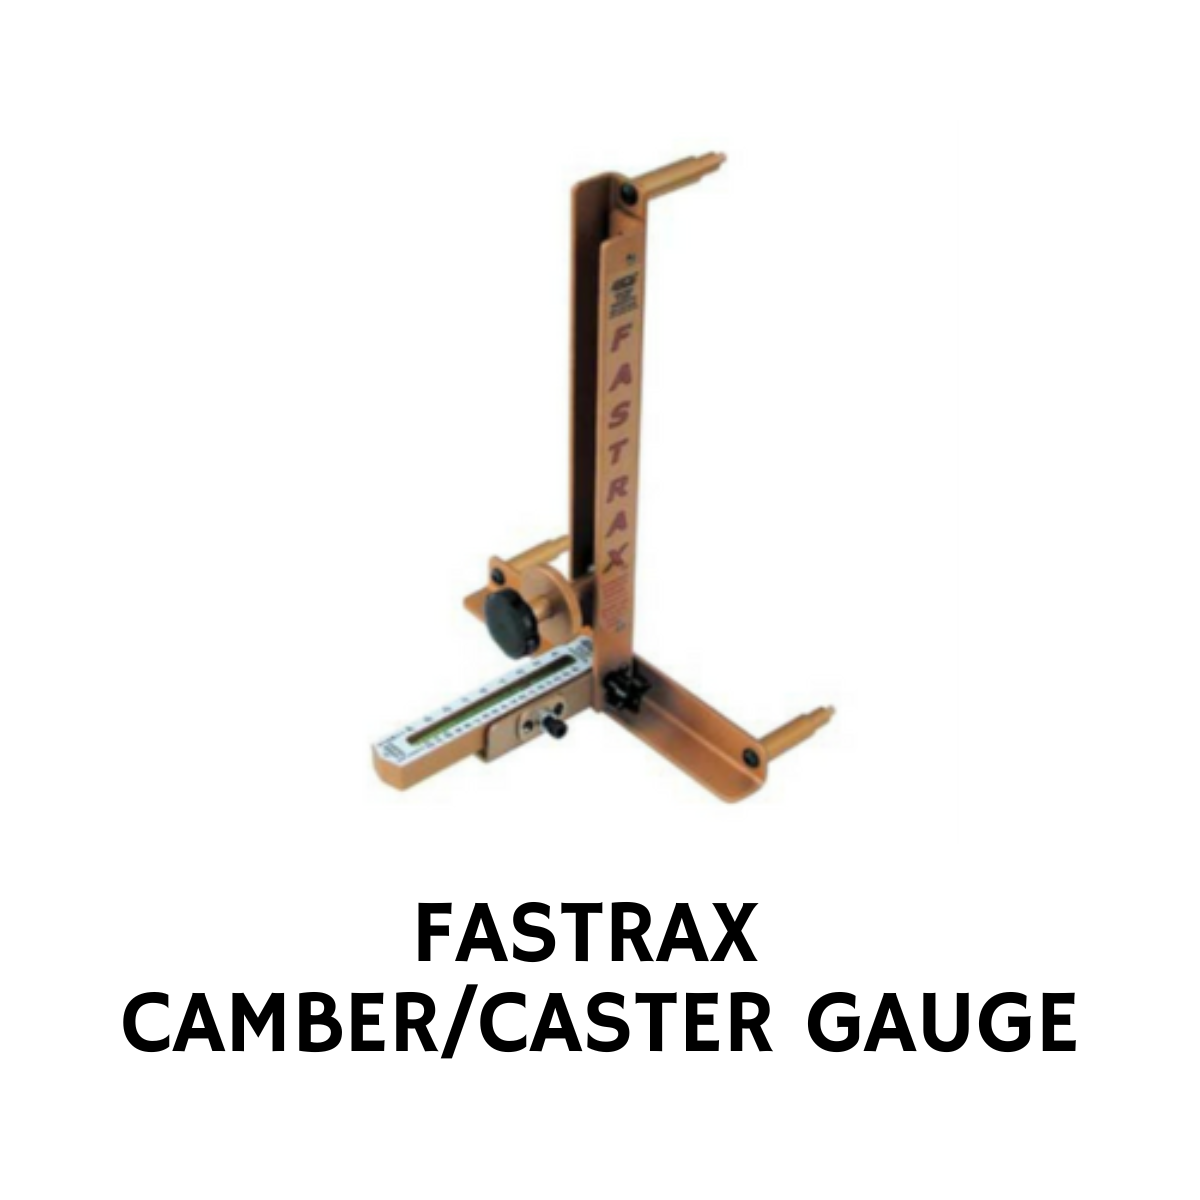 FASTRAX CAMBER/CASTER GAUGE